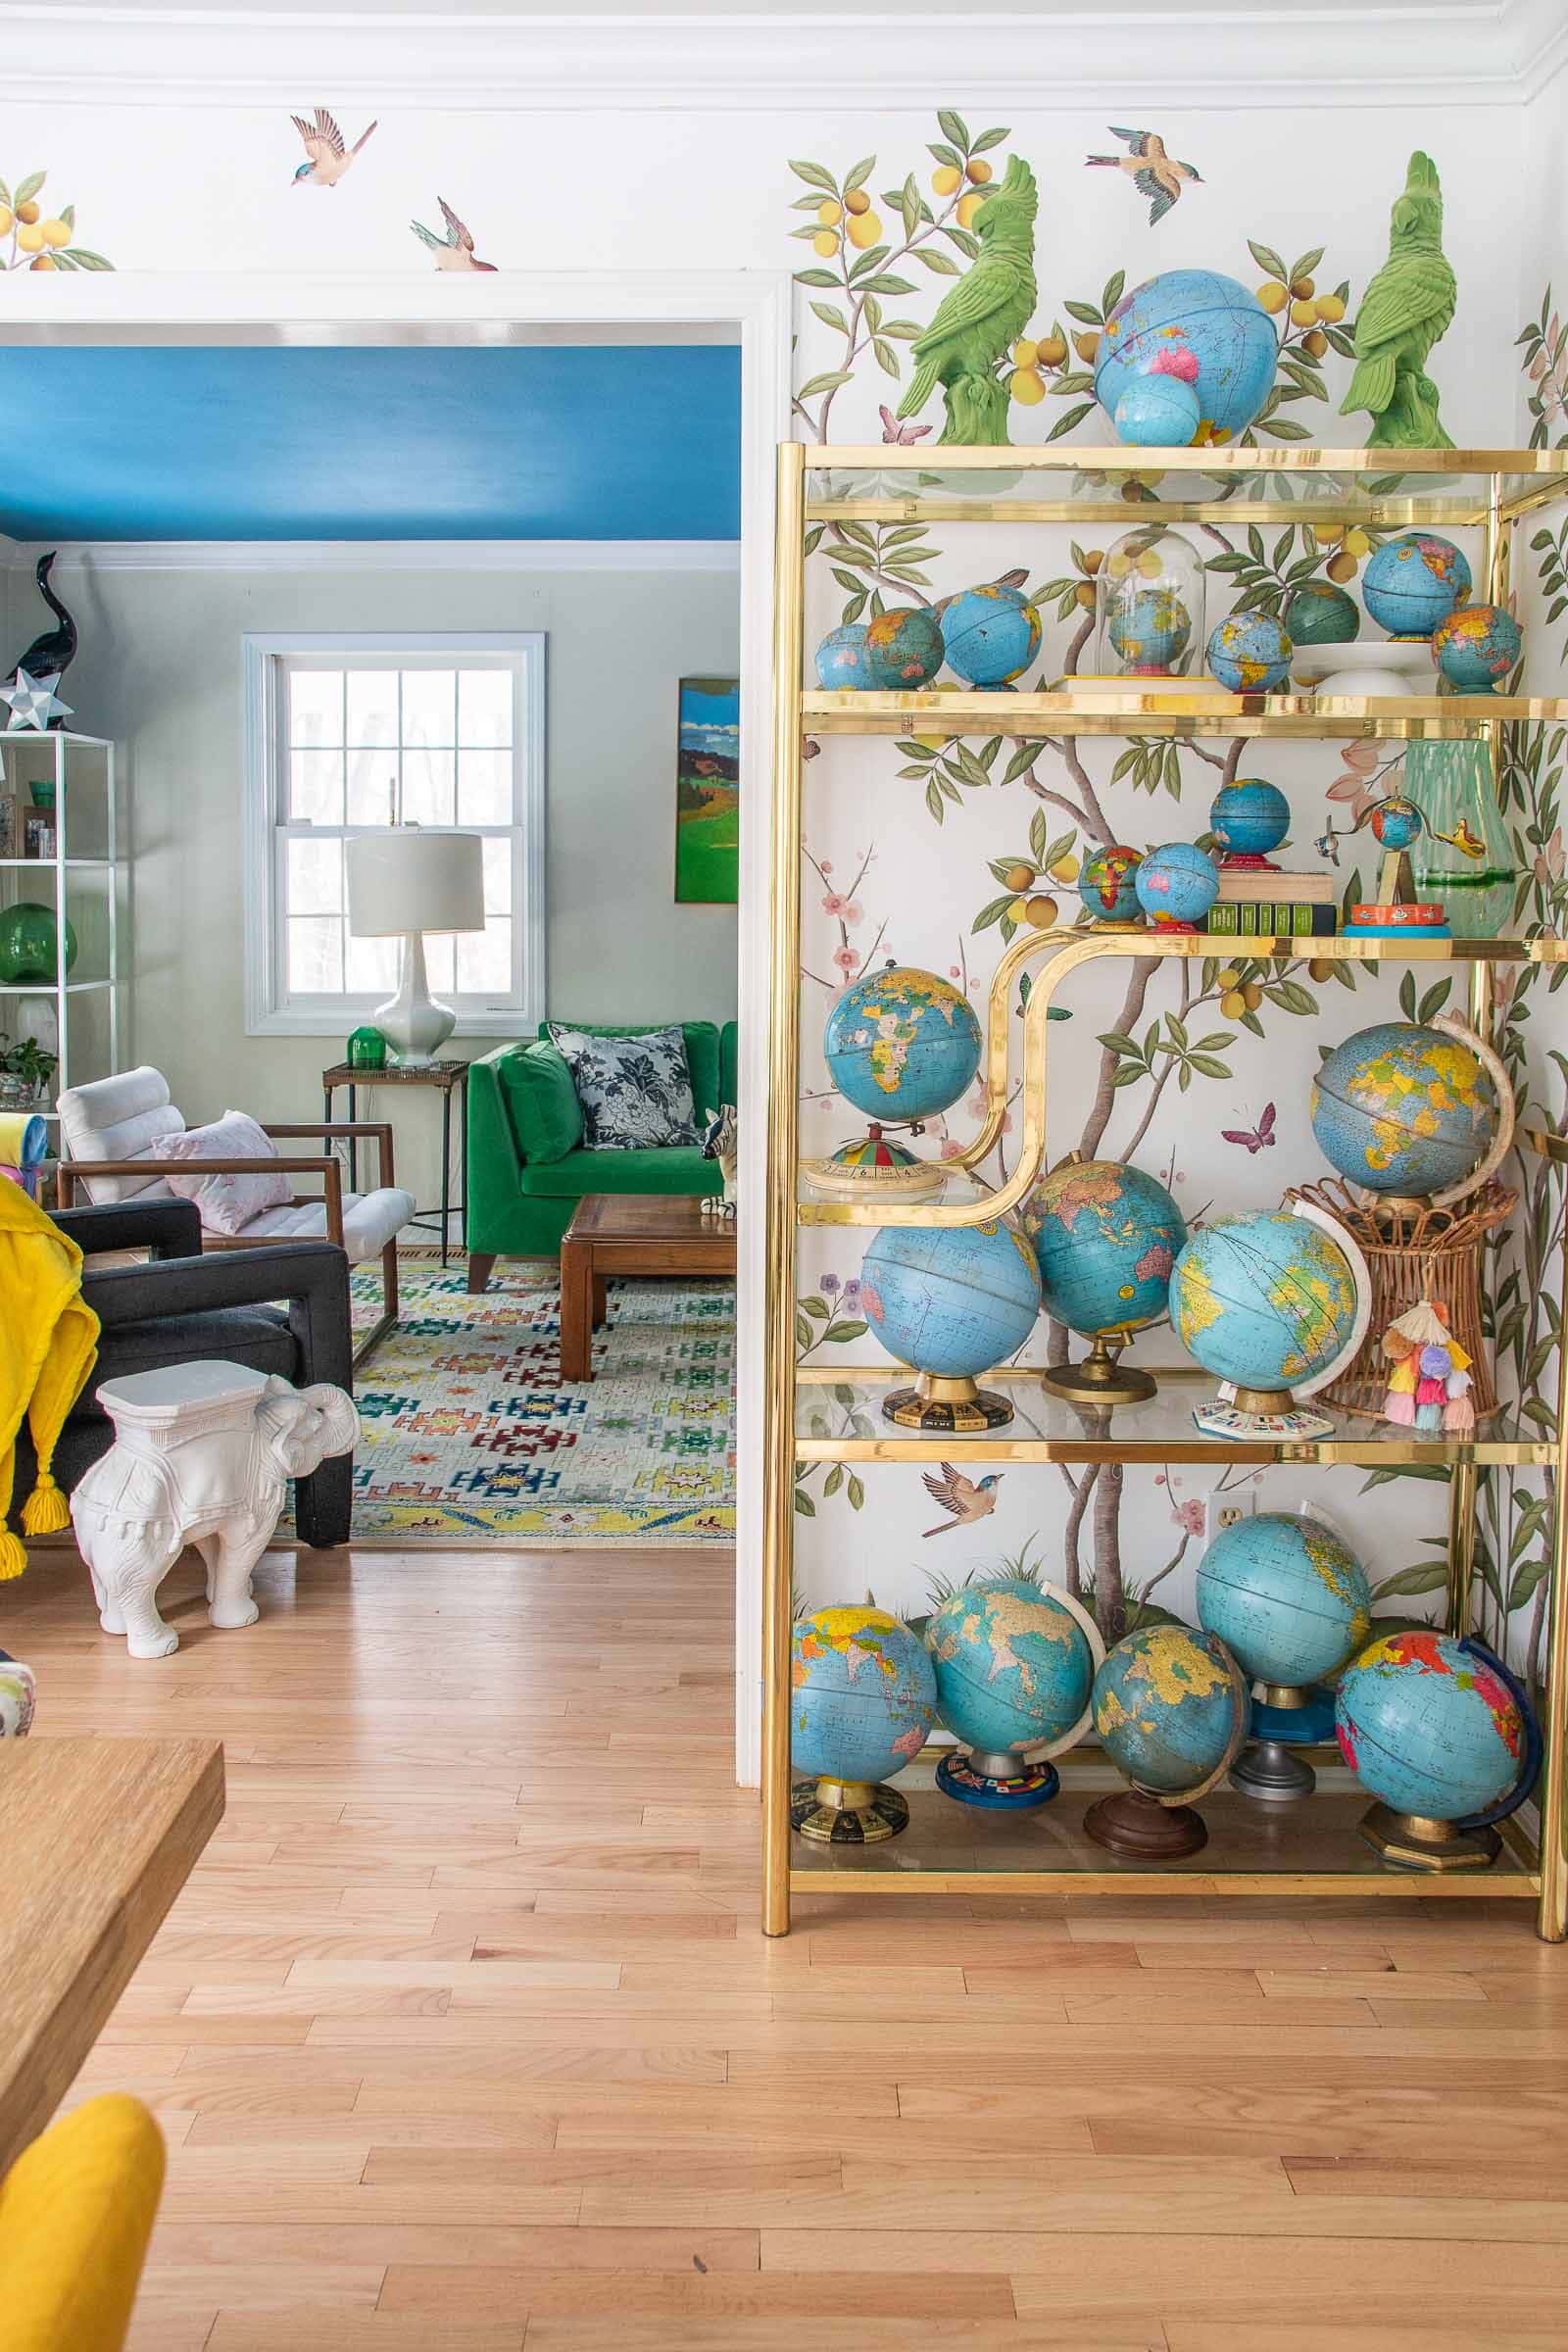 Maximalist style home with ornamental globes of various sizes in front of Diane Hill's chinoiserie wallpaper design for Rebel Walls